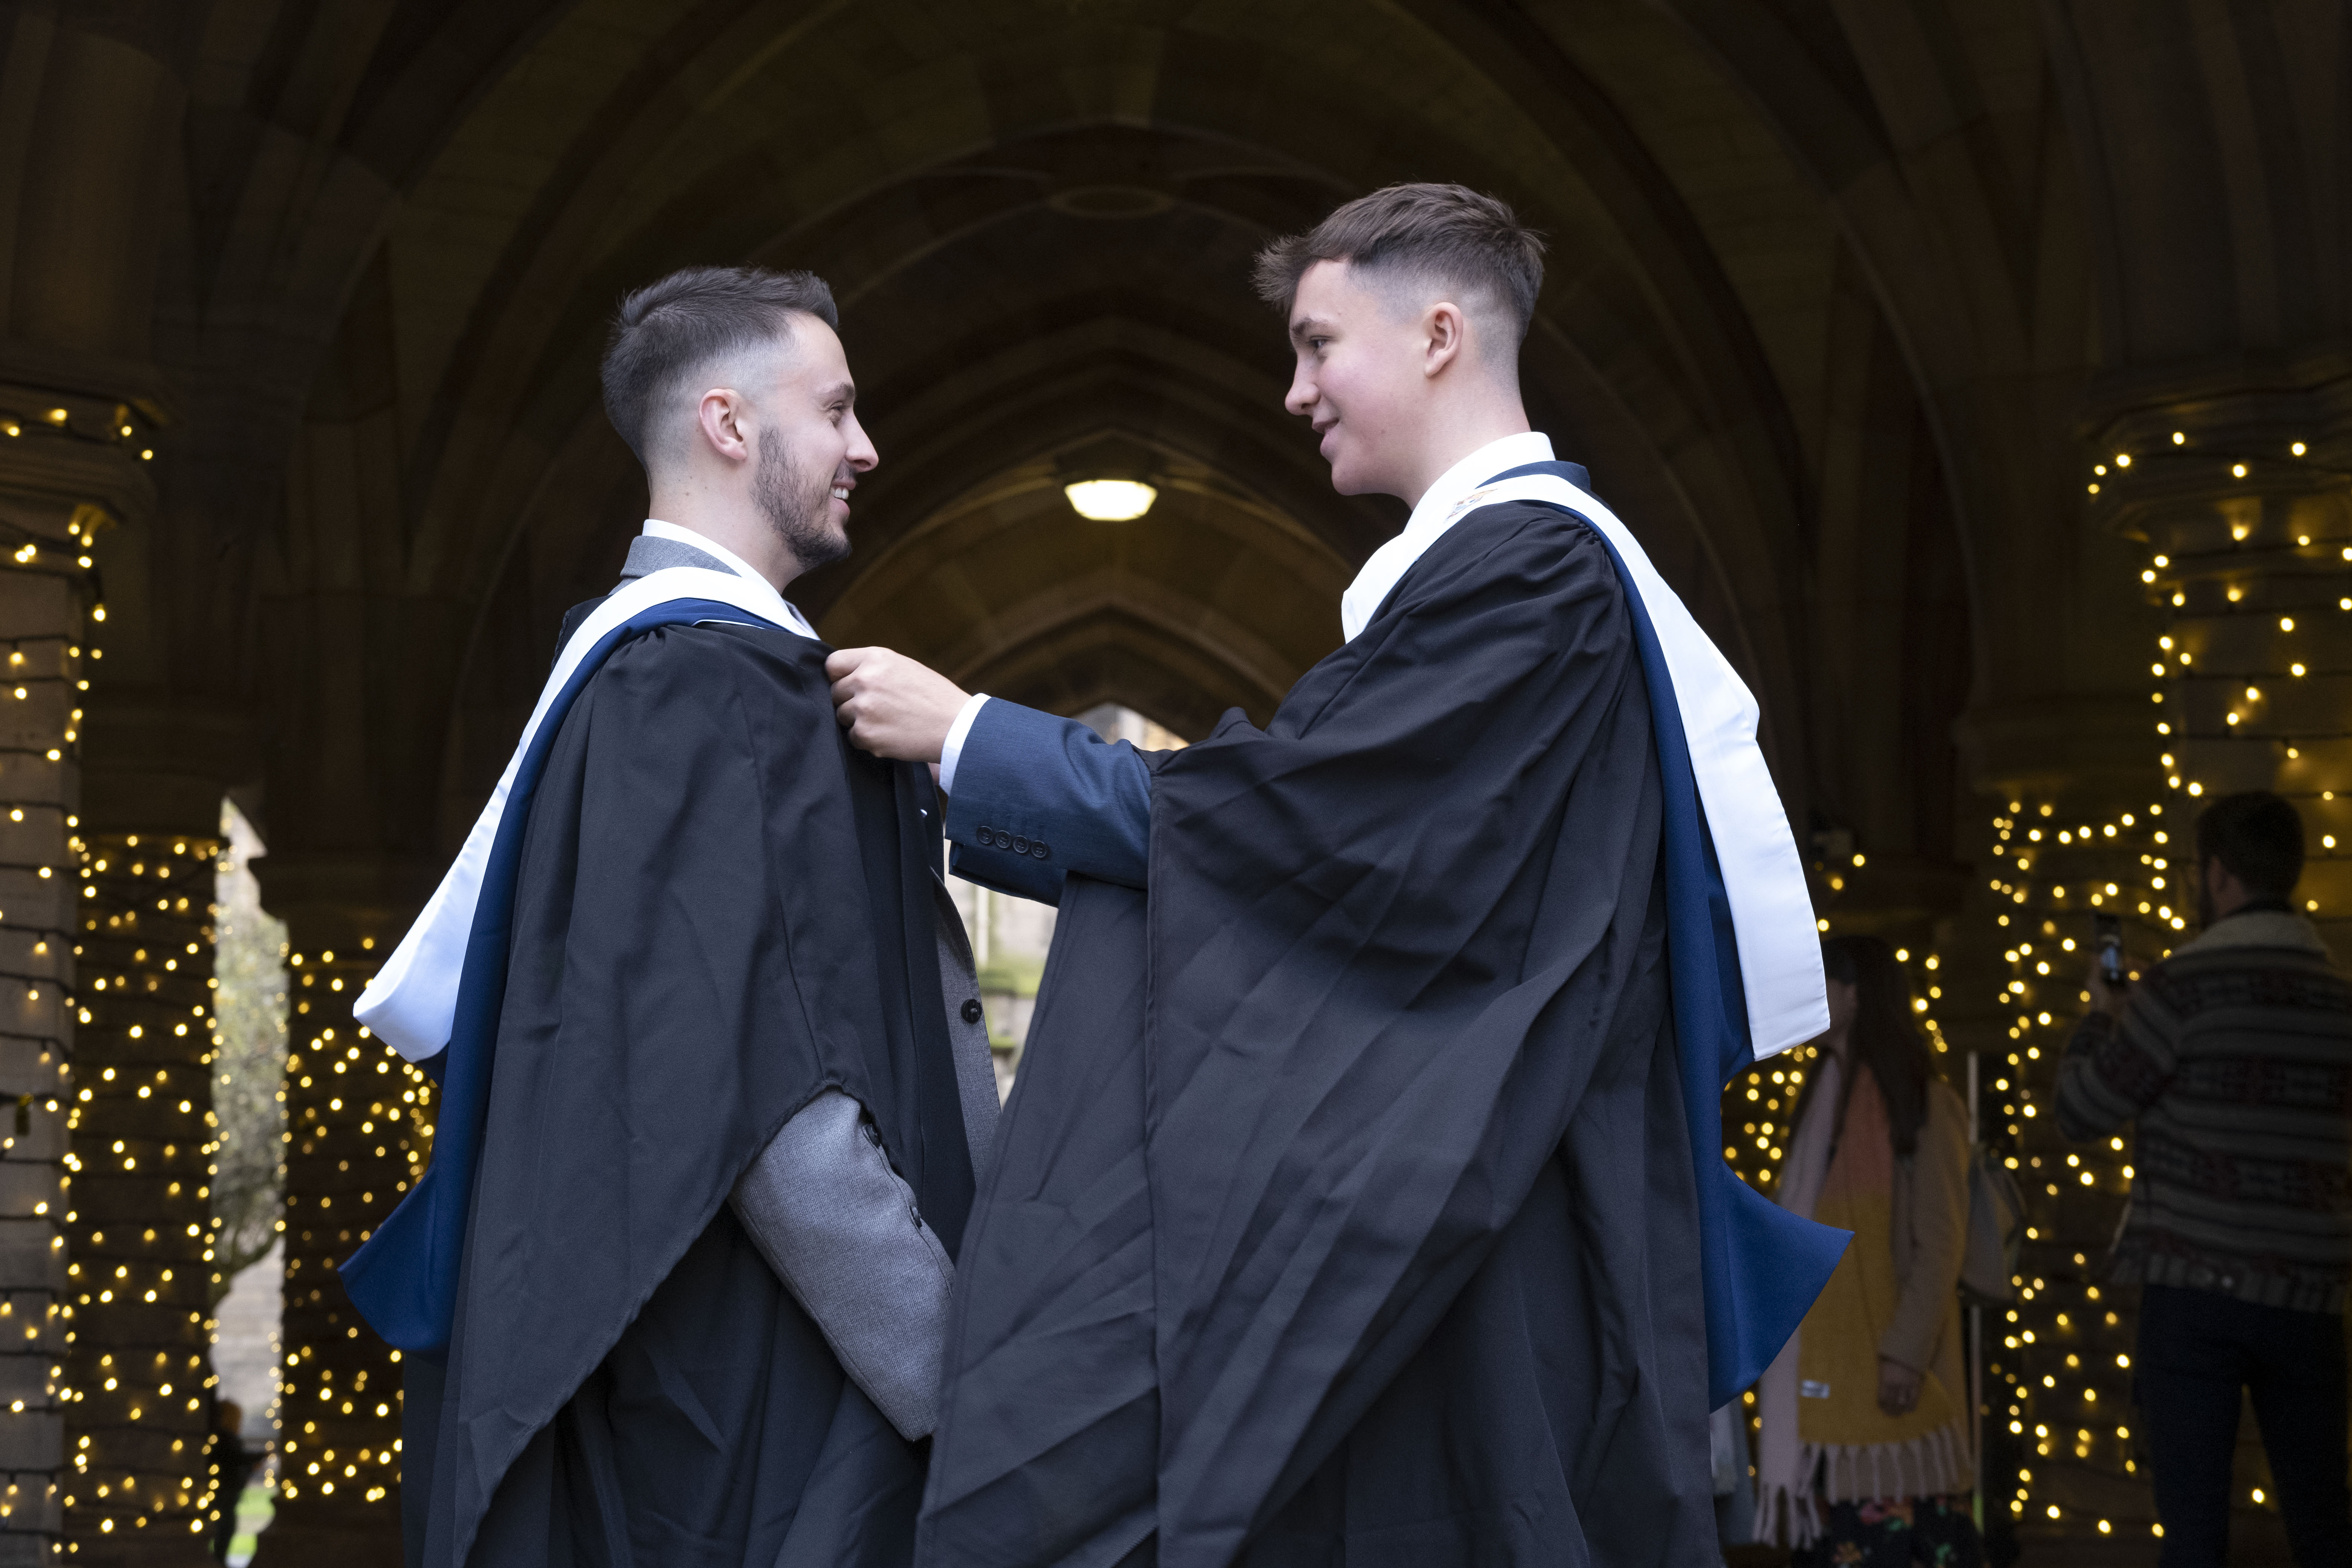 Two male graduates standing in cloisters